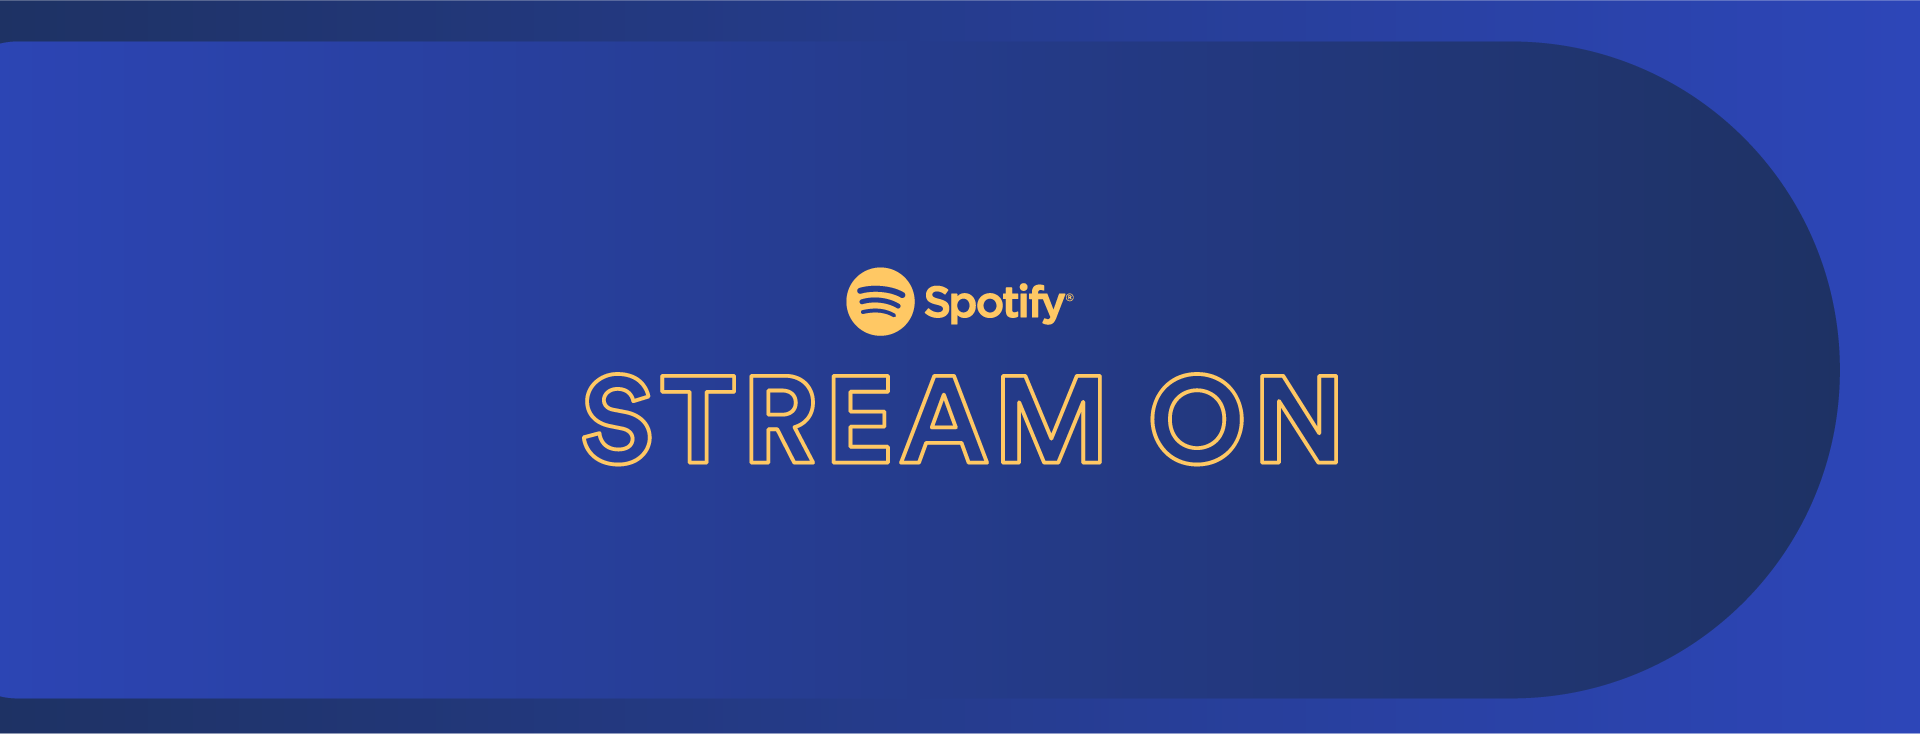 All of Spotify’s biggest announcements from their monumental Stream On event